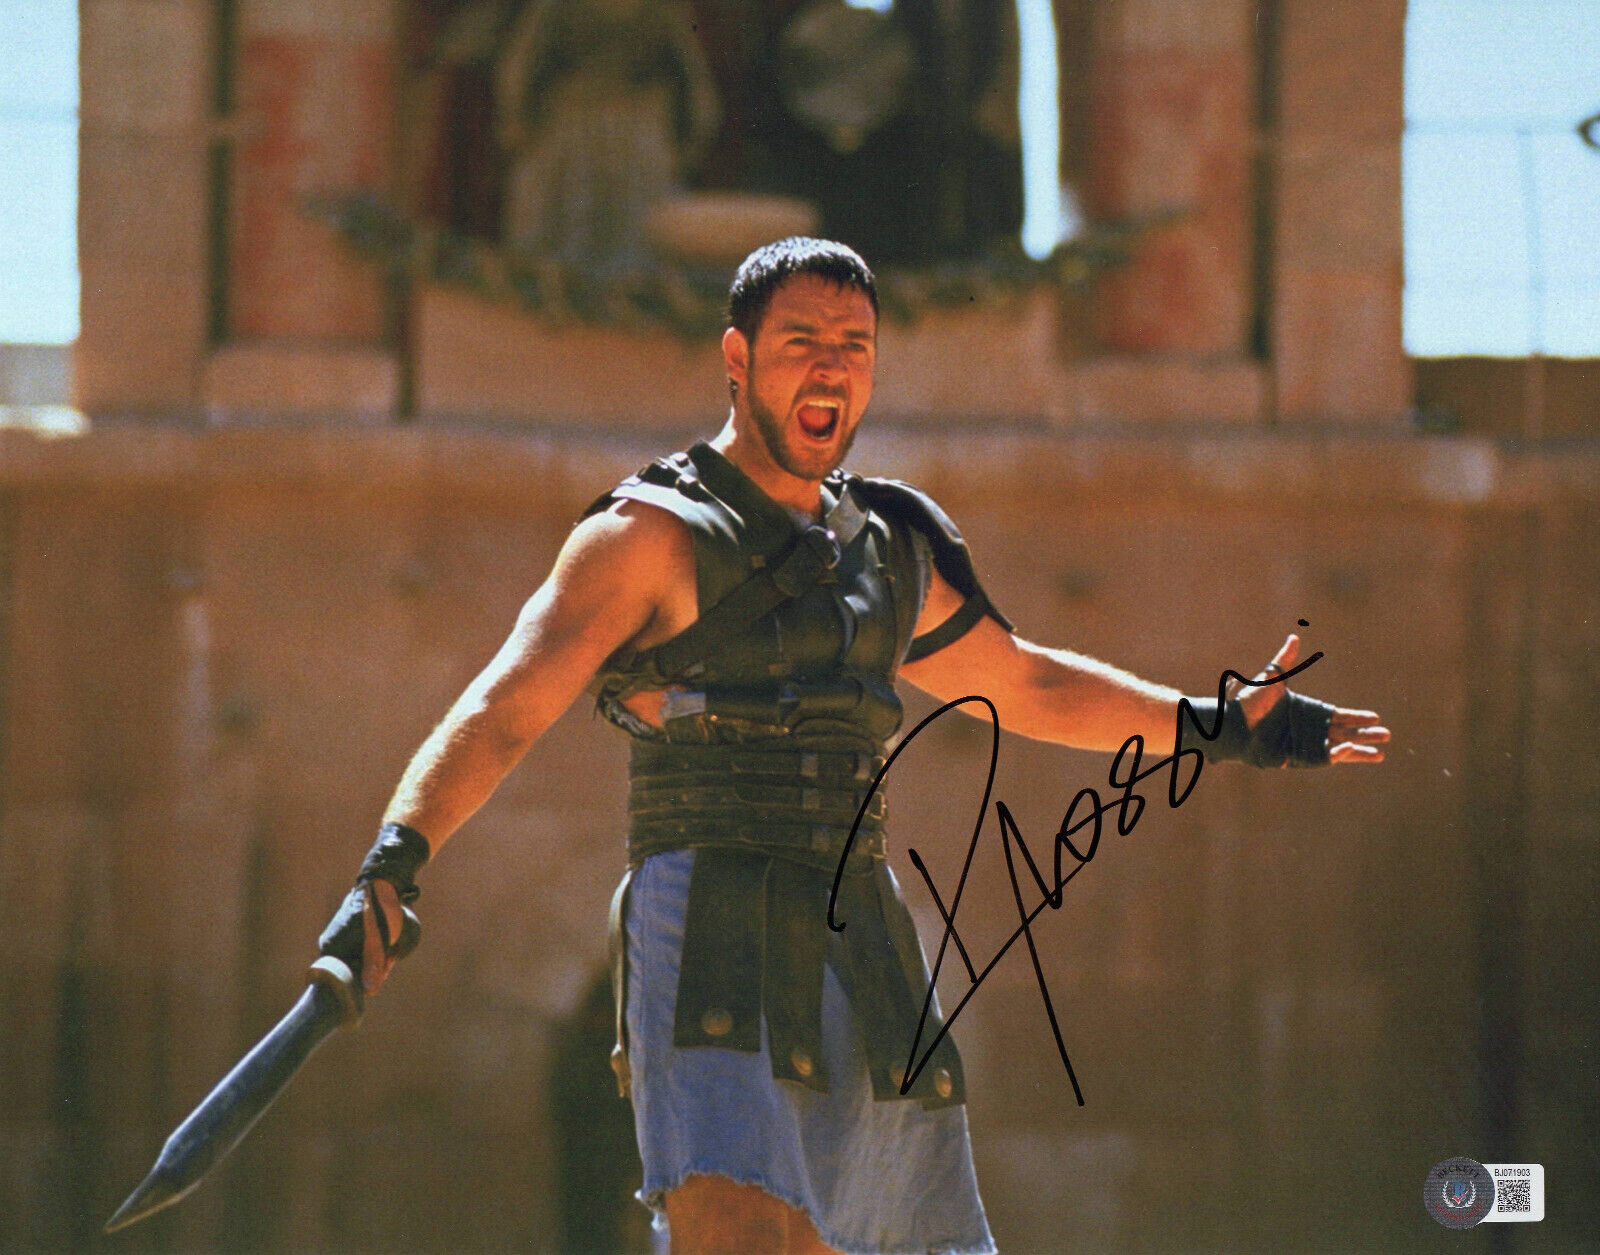 Russell Crowe Signed Autograph Gladiator 11x14 Photo Beckett BAS